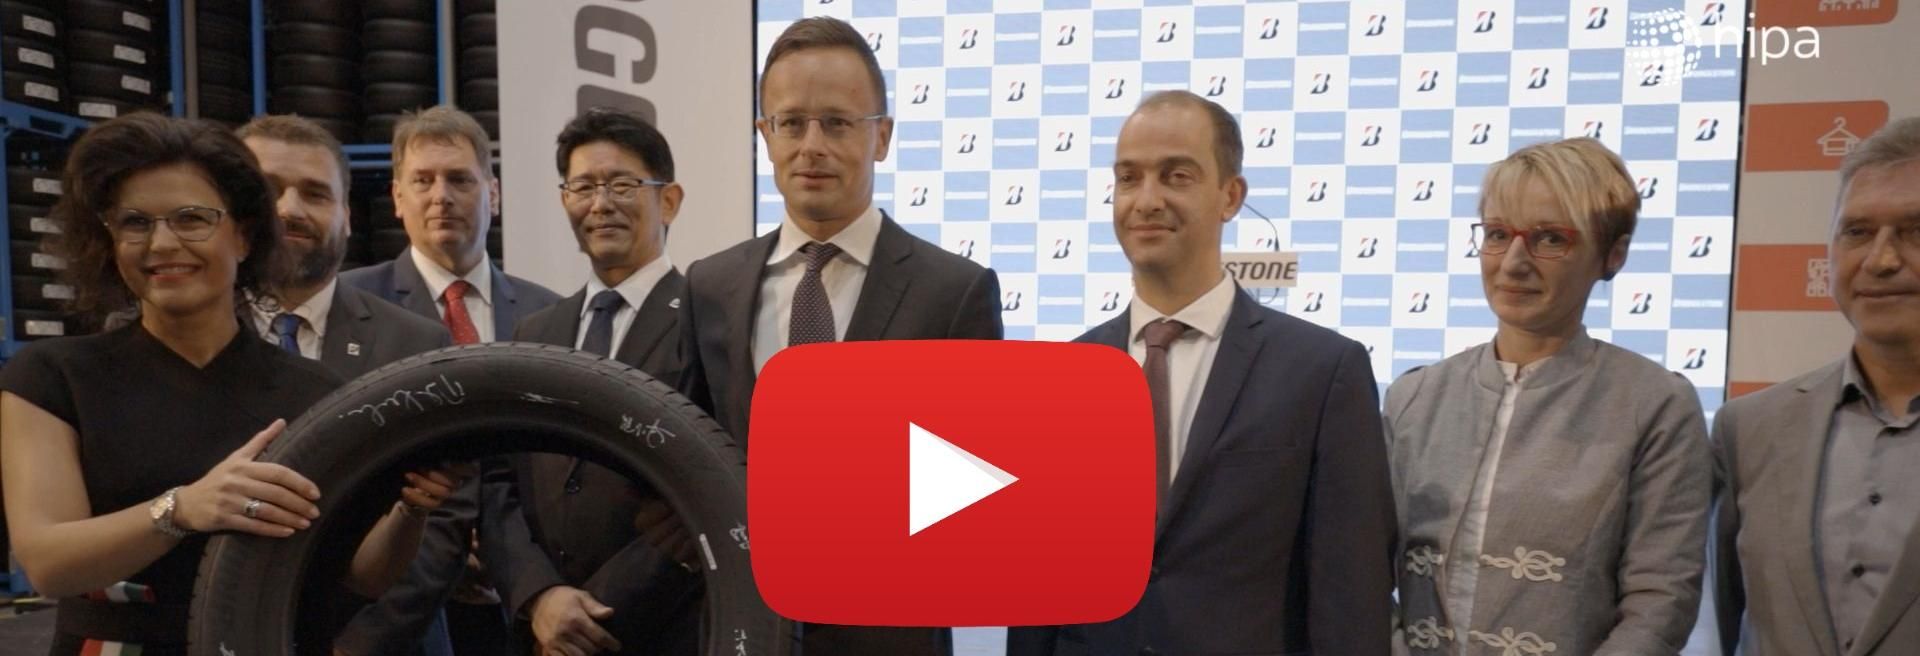 AI-based production further expands in Bridgestone’s unit in Tatabánya - VIDEO REPORT